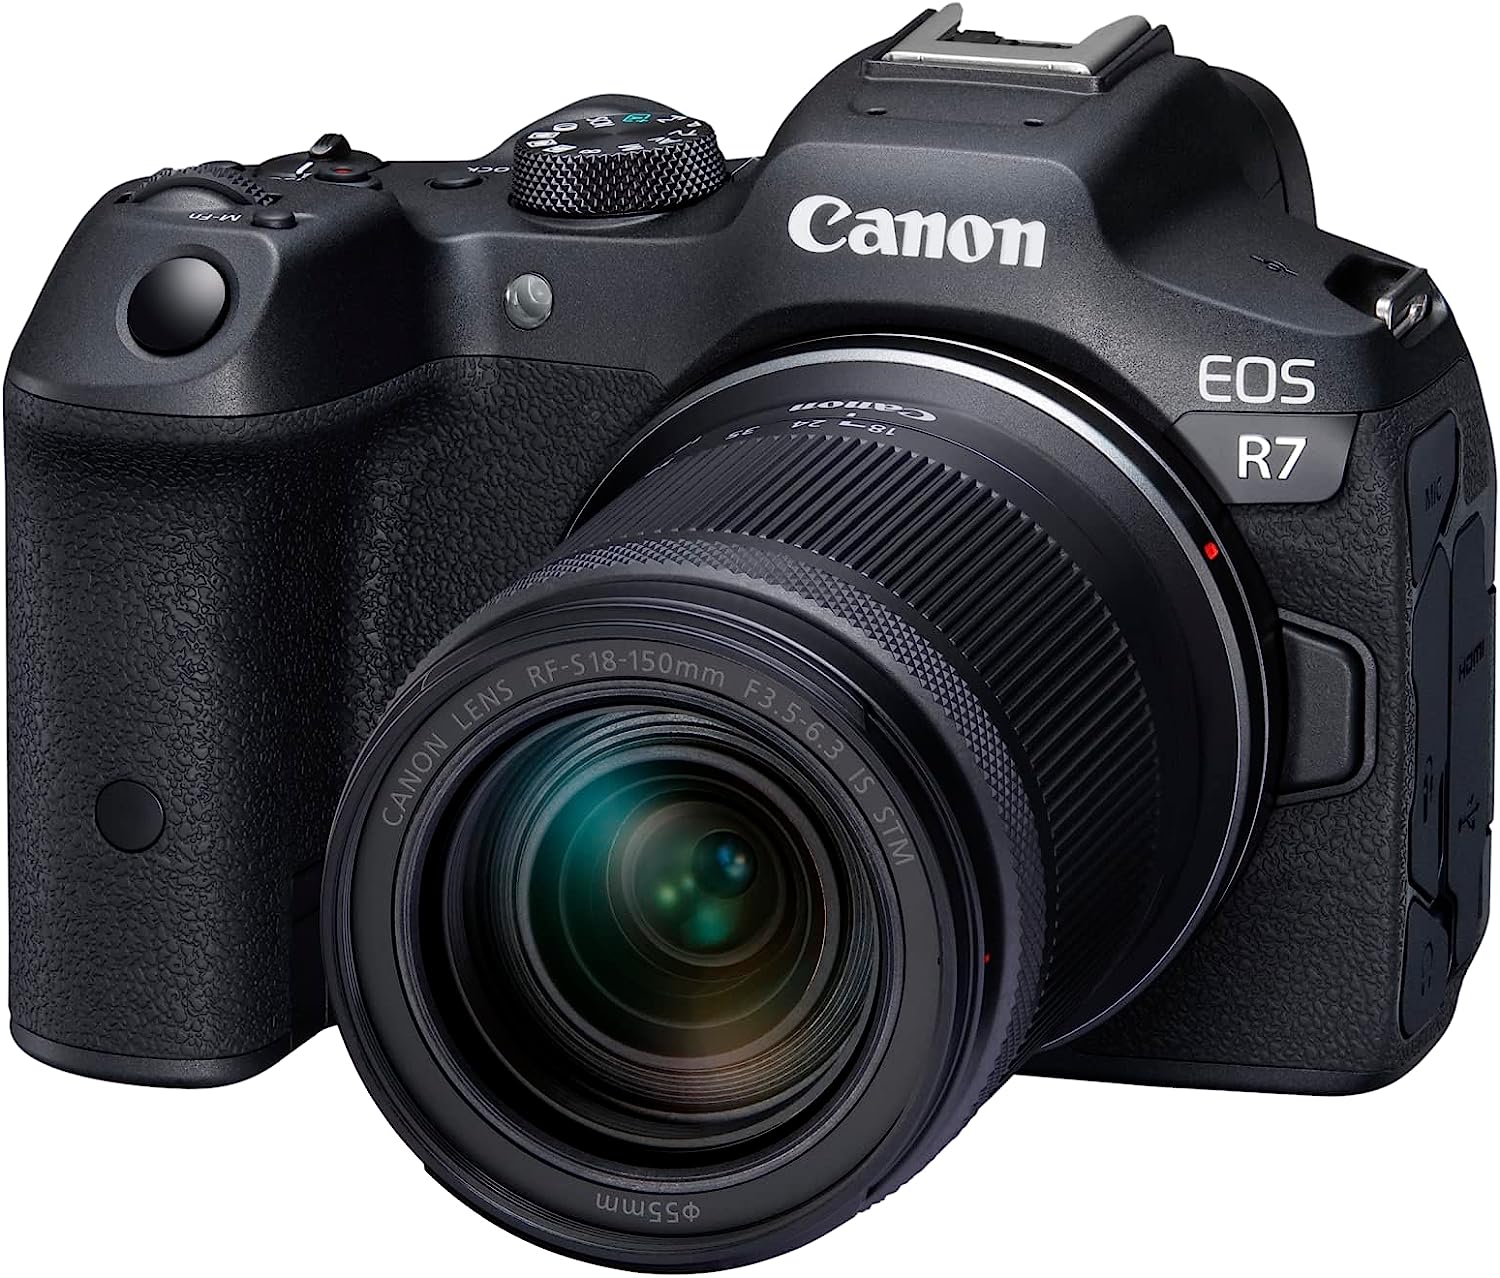 CANON%20EOS%20R7%20-%20Top%20quality%20mirrorless%20camera,%20best%20APS-C%20System,%20for%20professionals,%20for%20professional%20photography%20and%20videography.jpg